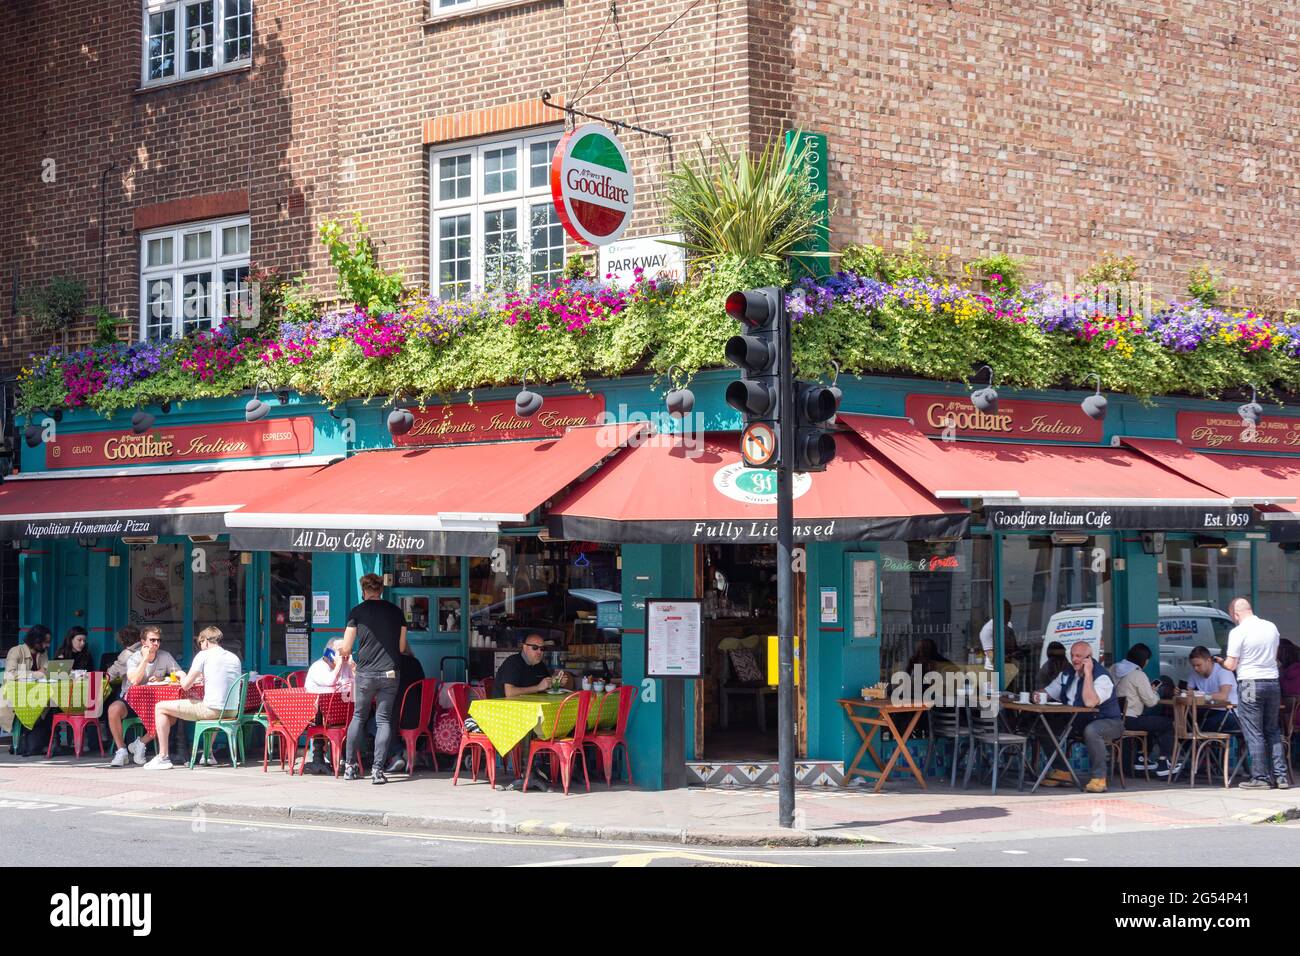 Restaurant italien Goodfare, The Parkway, Camden Town, London Borough of Camden, Greater London, Angleterre, Royaume-Uni Banque D'Images